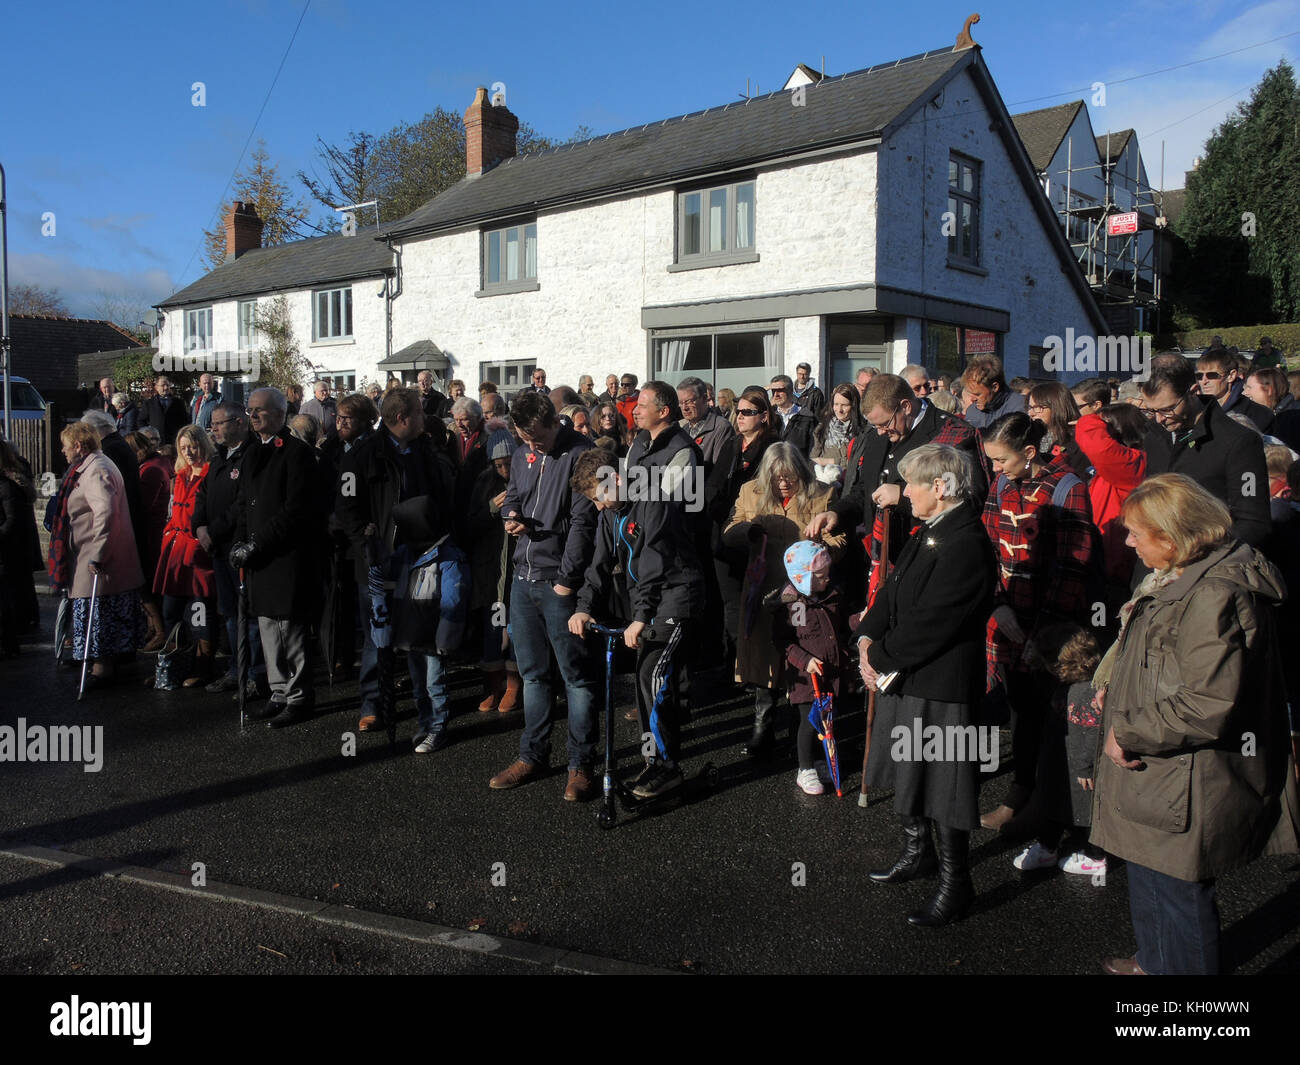 Lisvane,Cardiff, Wales, UK.12th November 2017. Lisvane Village Remembrance Day service at the cenotaph. Revd Chris Burr presiding. The 99th Anniversary of the end of The Great War (WWI) and 100 years of the Battle of Passchendaele which took so many in South Wales.  Picture Credit: IAN HOMER/Alamy Live News Stock Photo